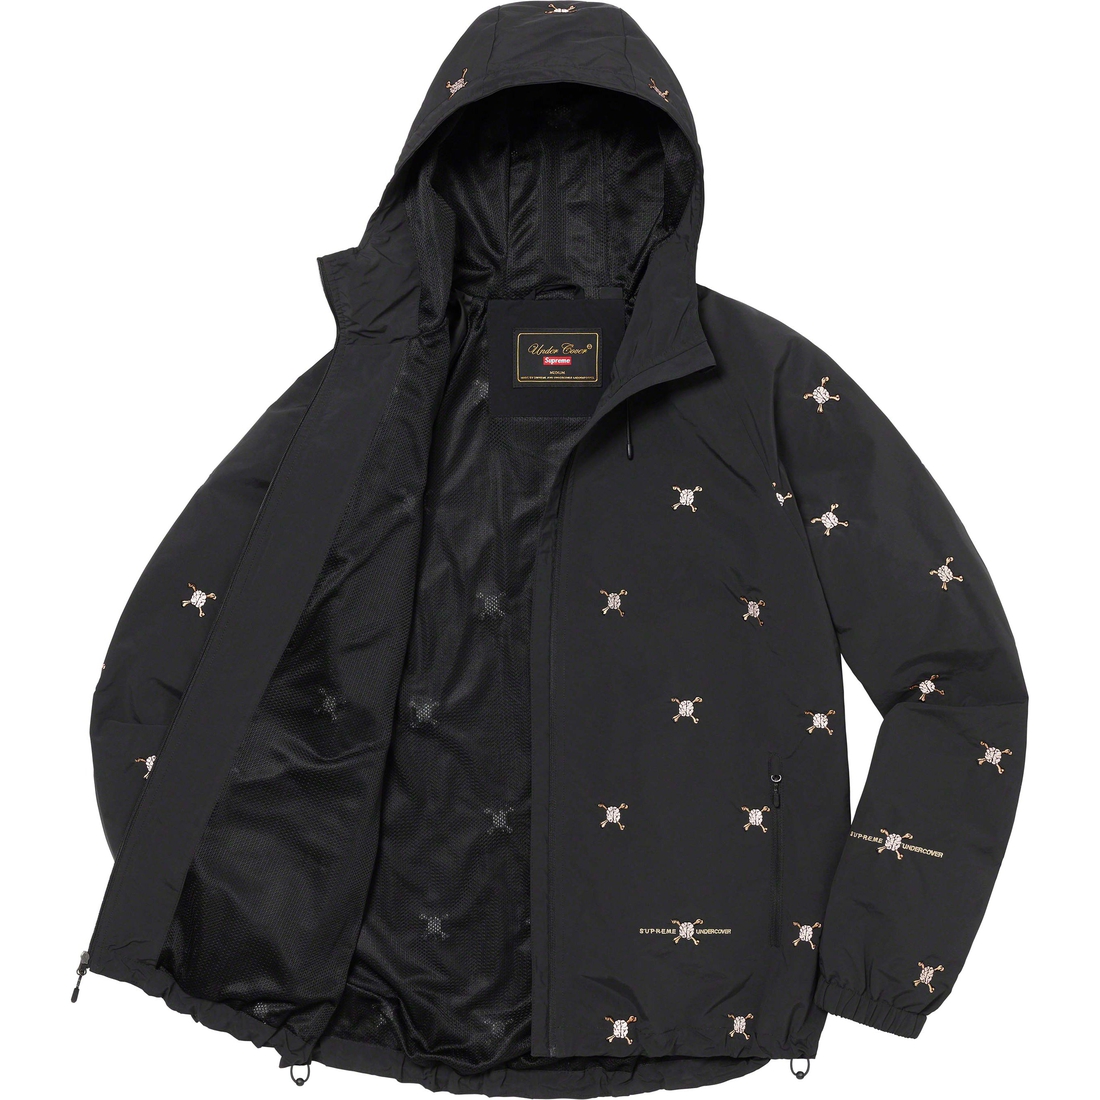 Details on Supreme UNDERCOVER Track Jacket Black from spring summer 2023 (Price is $228)